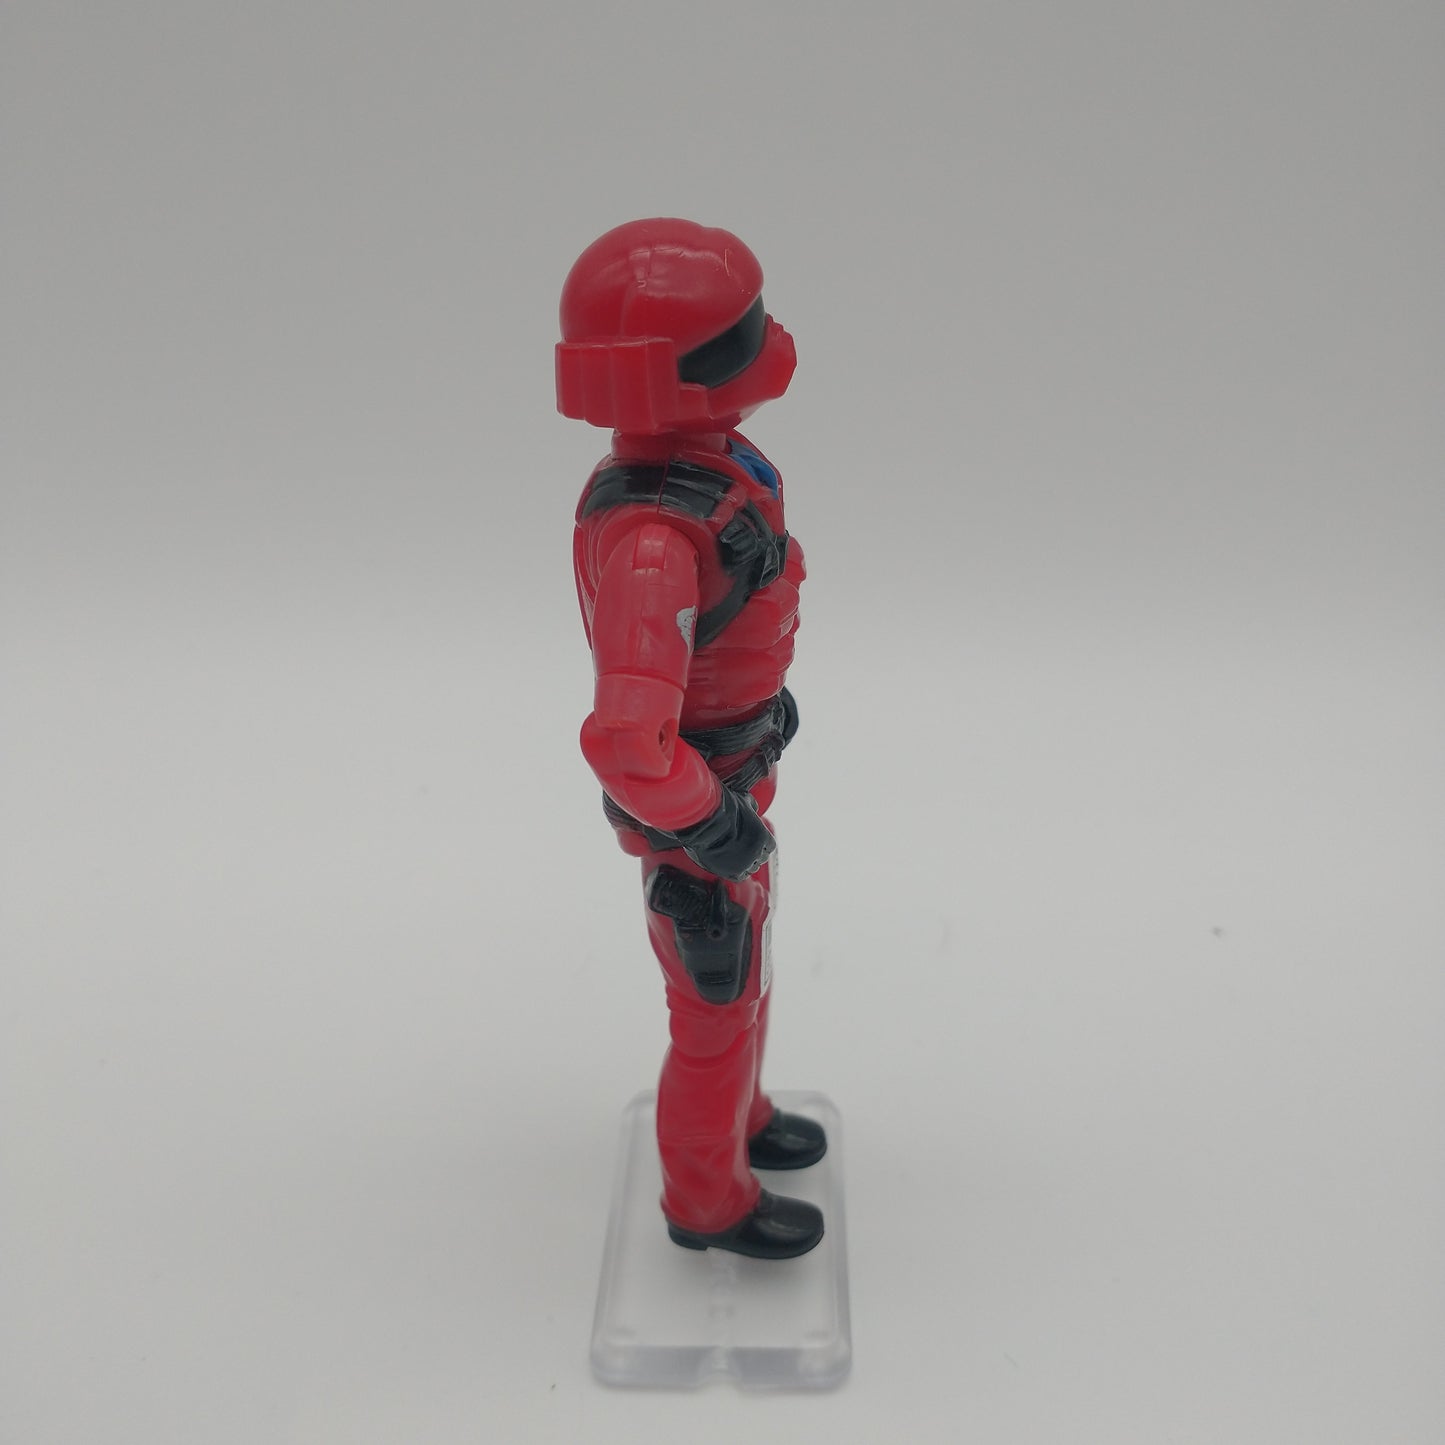 The action figure from the left side